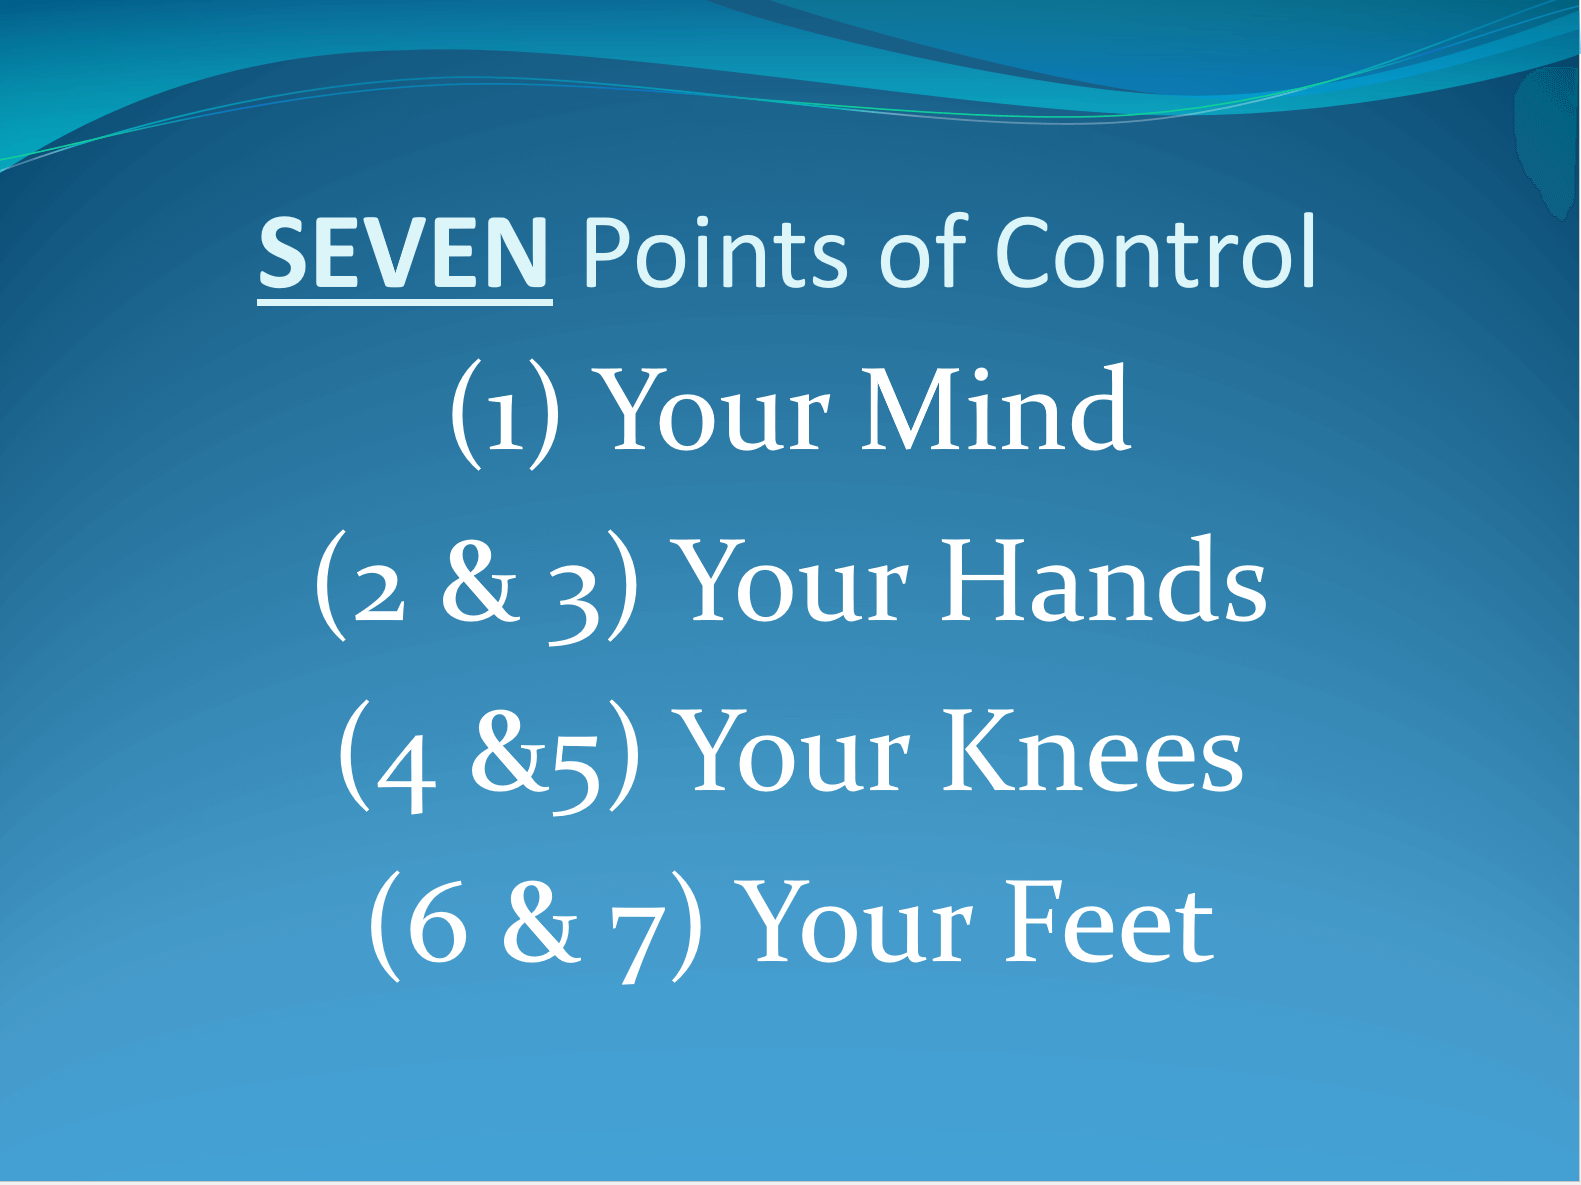 PowerPoint slide titled "Seven Points of Control by Bilal Qizilbash 2017 Power of You Talk.